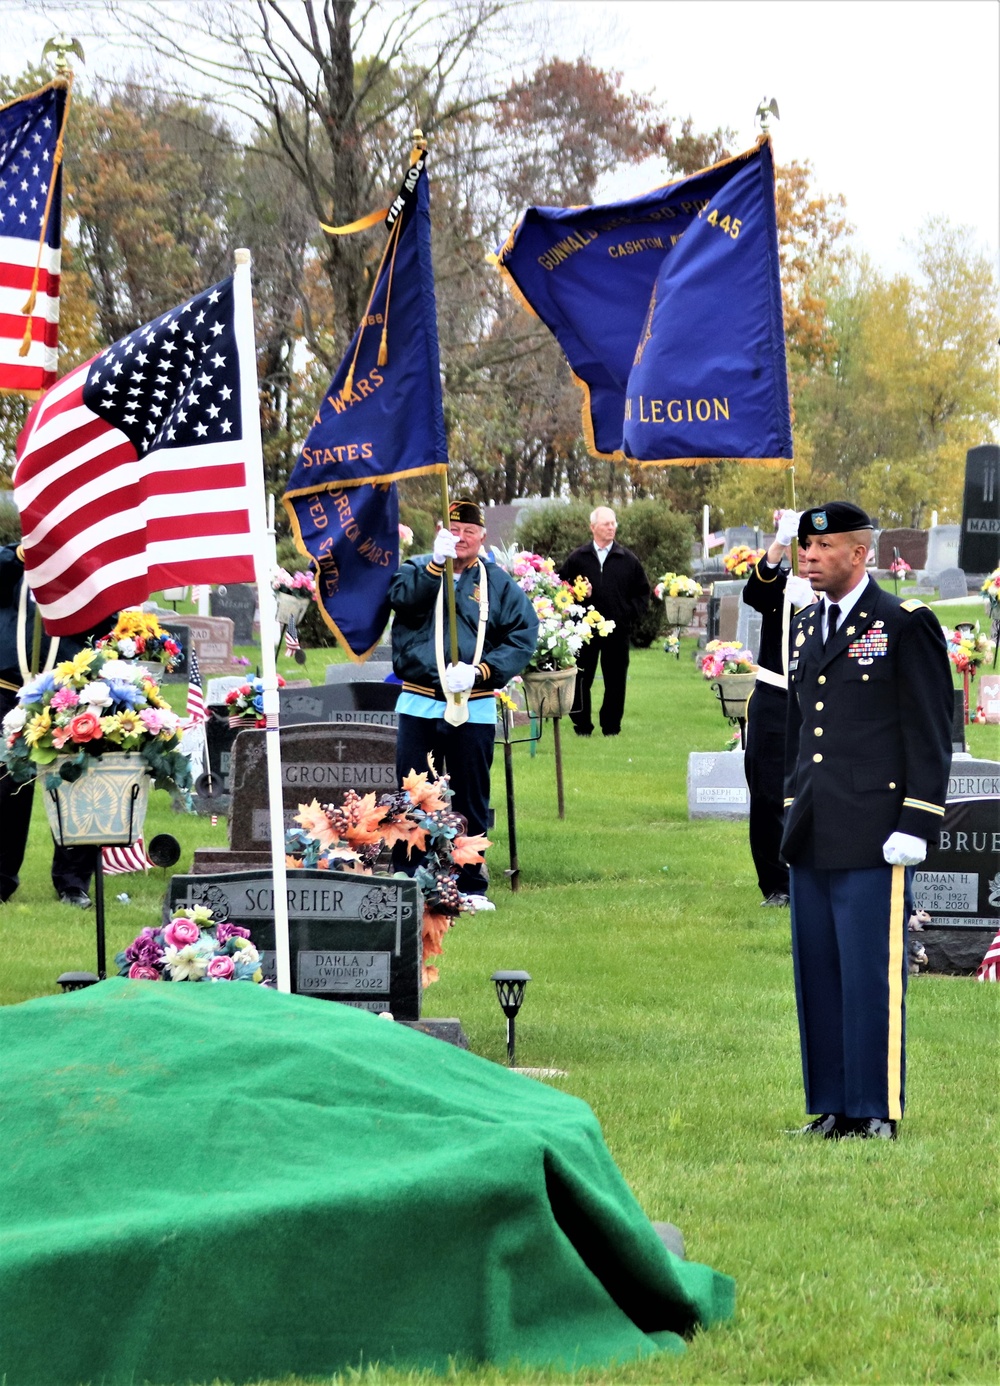 Korean War hero laid to rest in return to Wisconsin hometown after 73 years